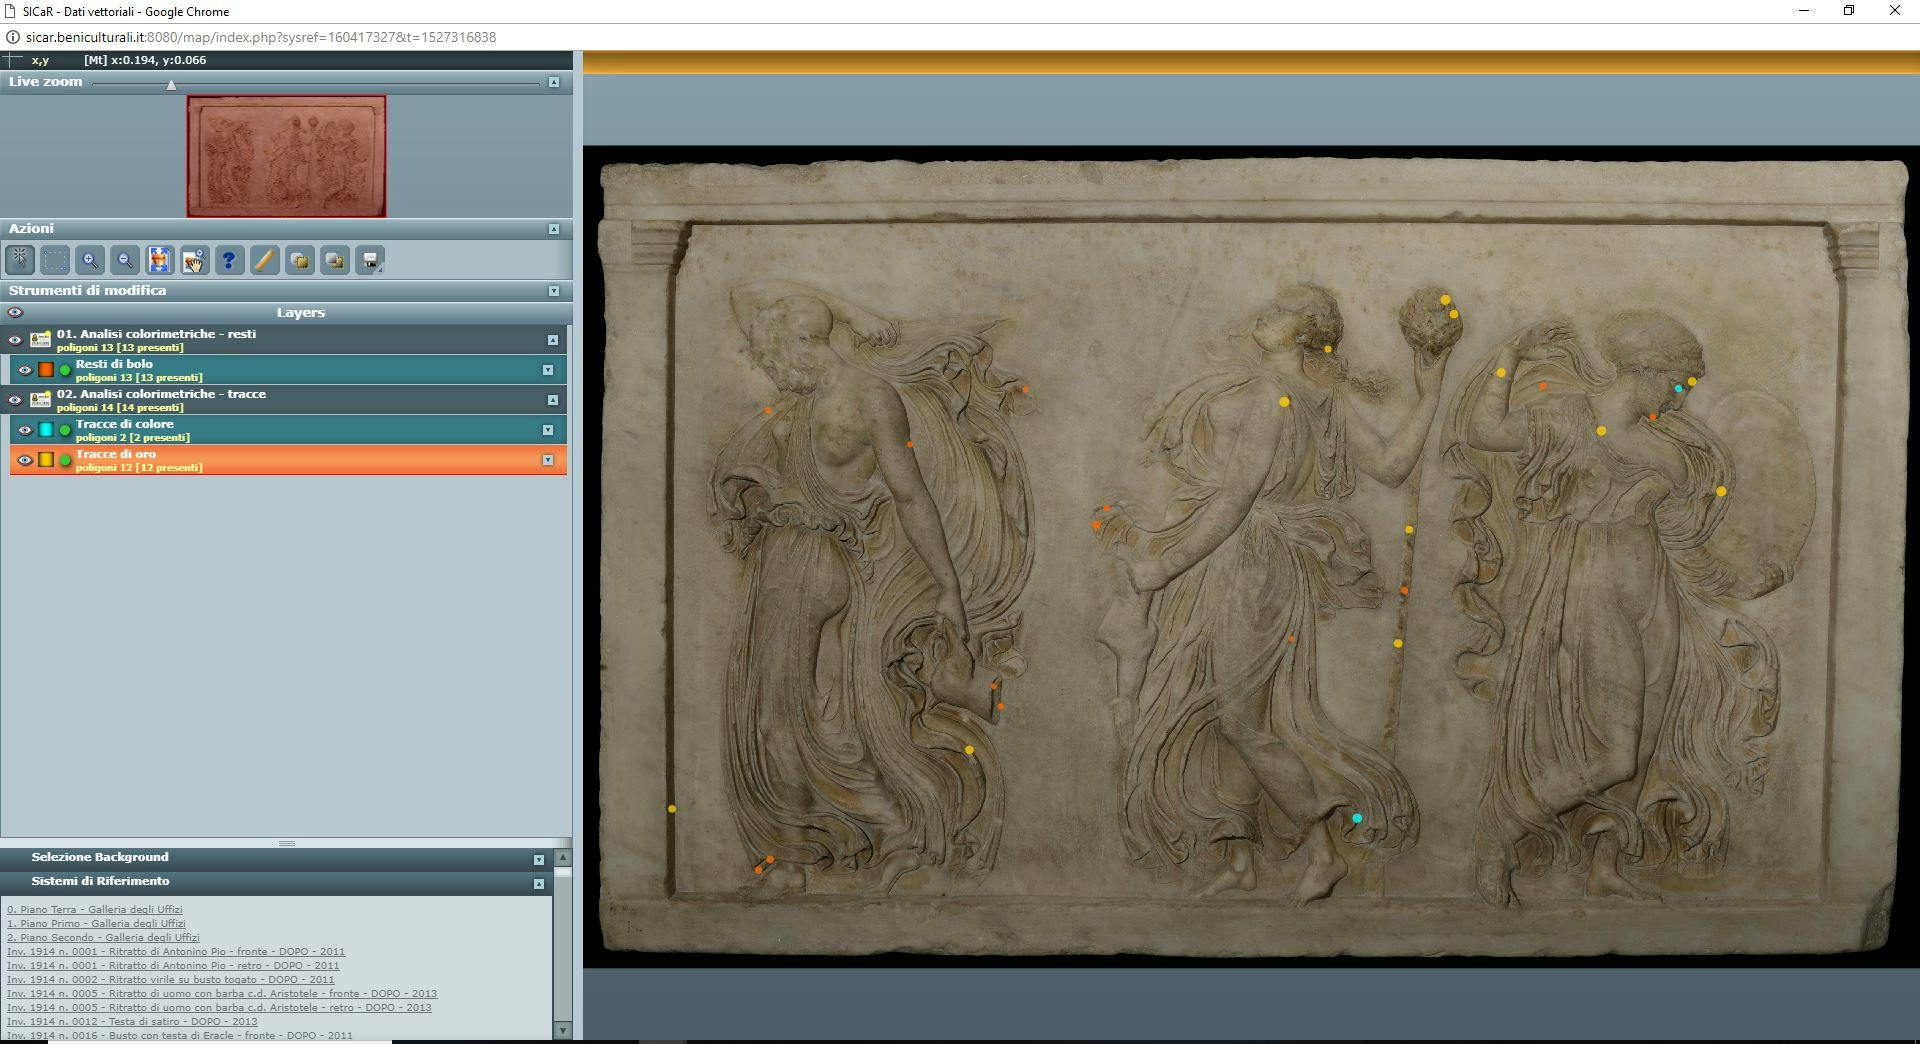 An online database for the conservation and study of the Uffizi ancient sculptures